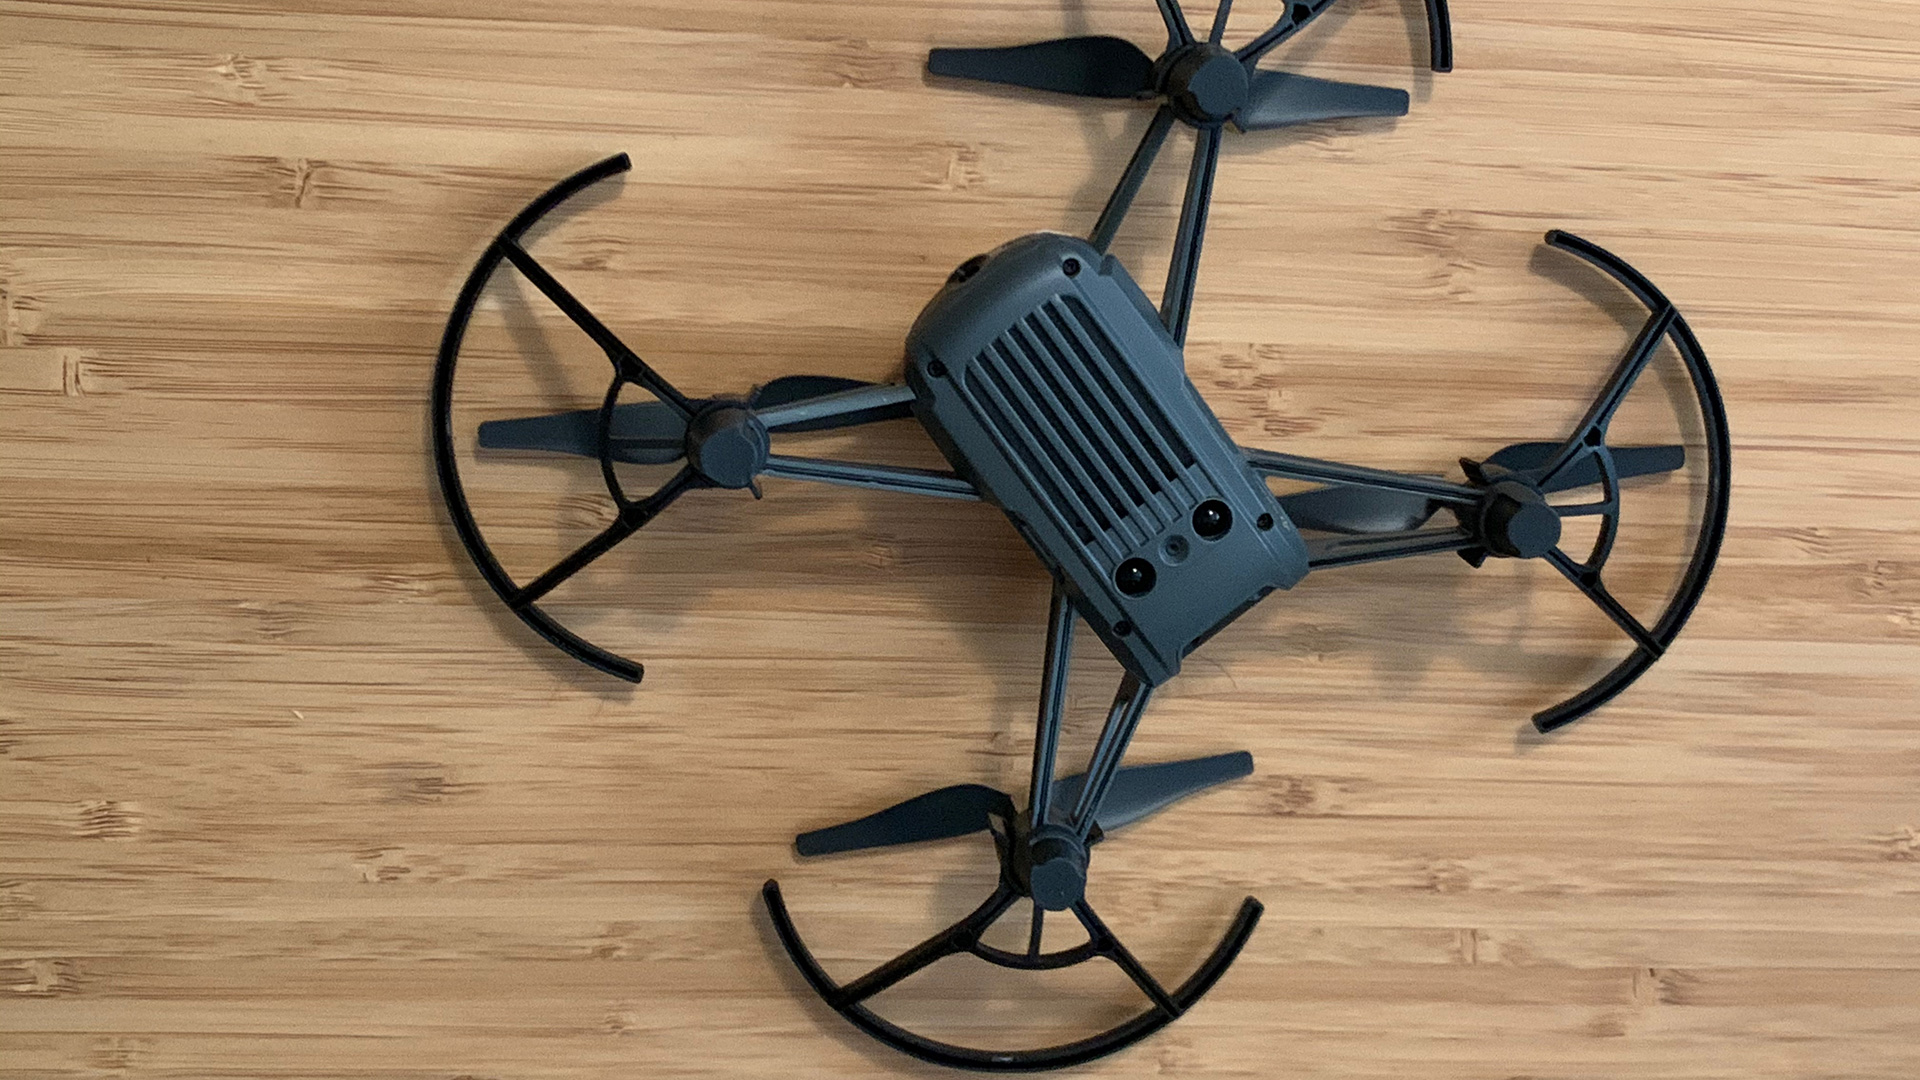 T3 Ryze Tello review: | moves precise and stability incredible drone